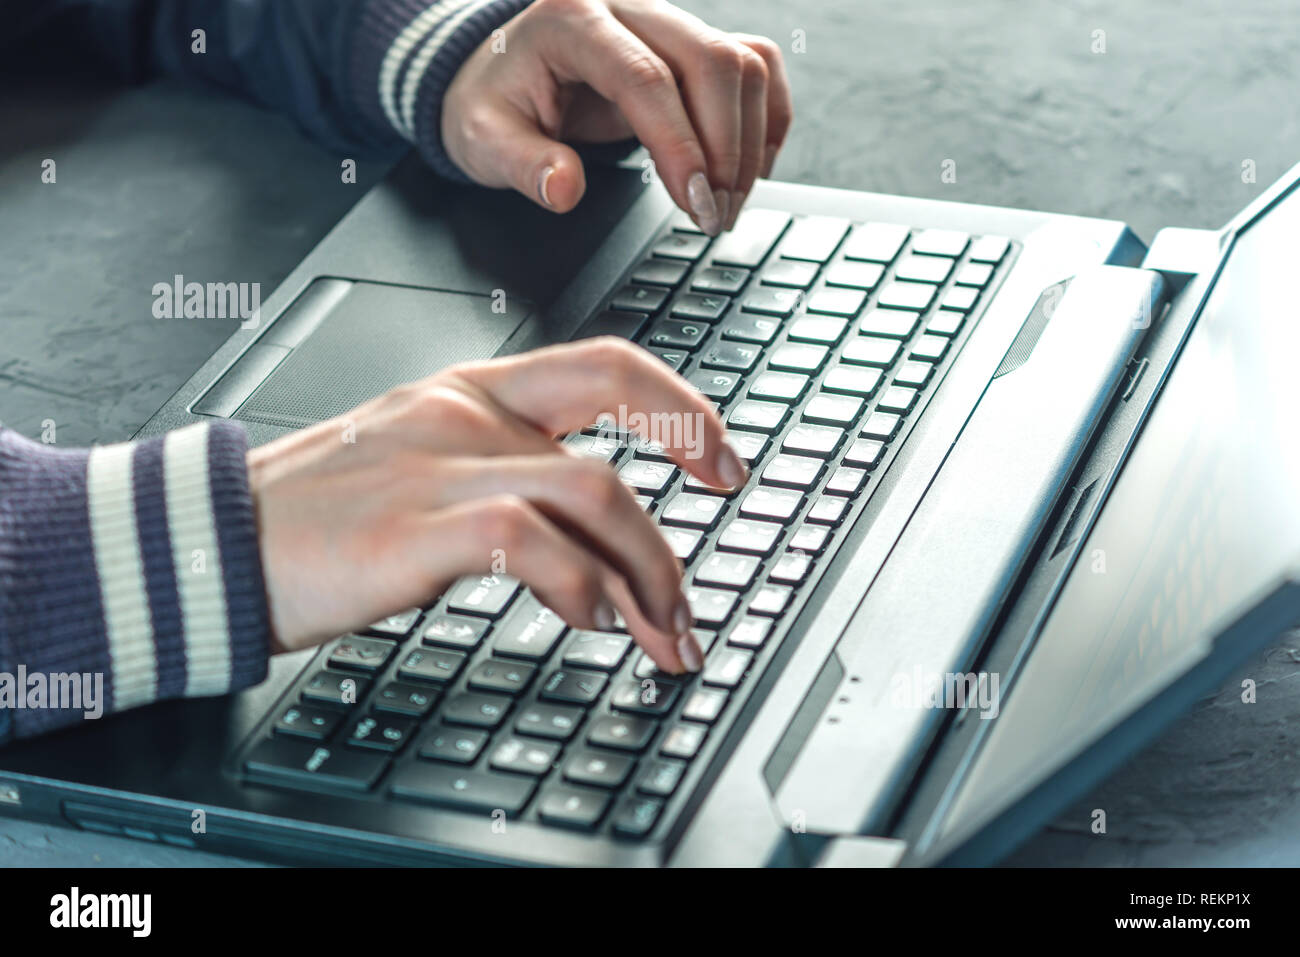 Hacker the programmer is typing on the keyboard of the laptop to hack the system. Stealing personal data. Creation and infection of malicious virus. Stock Photo